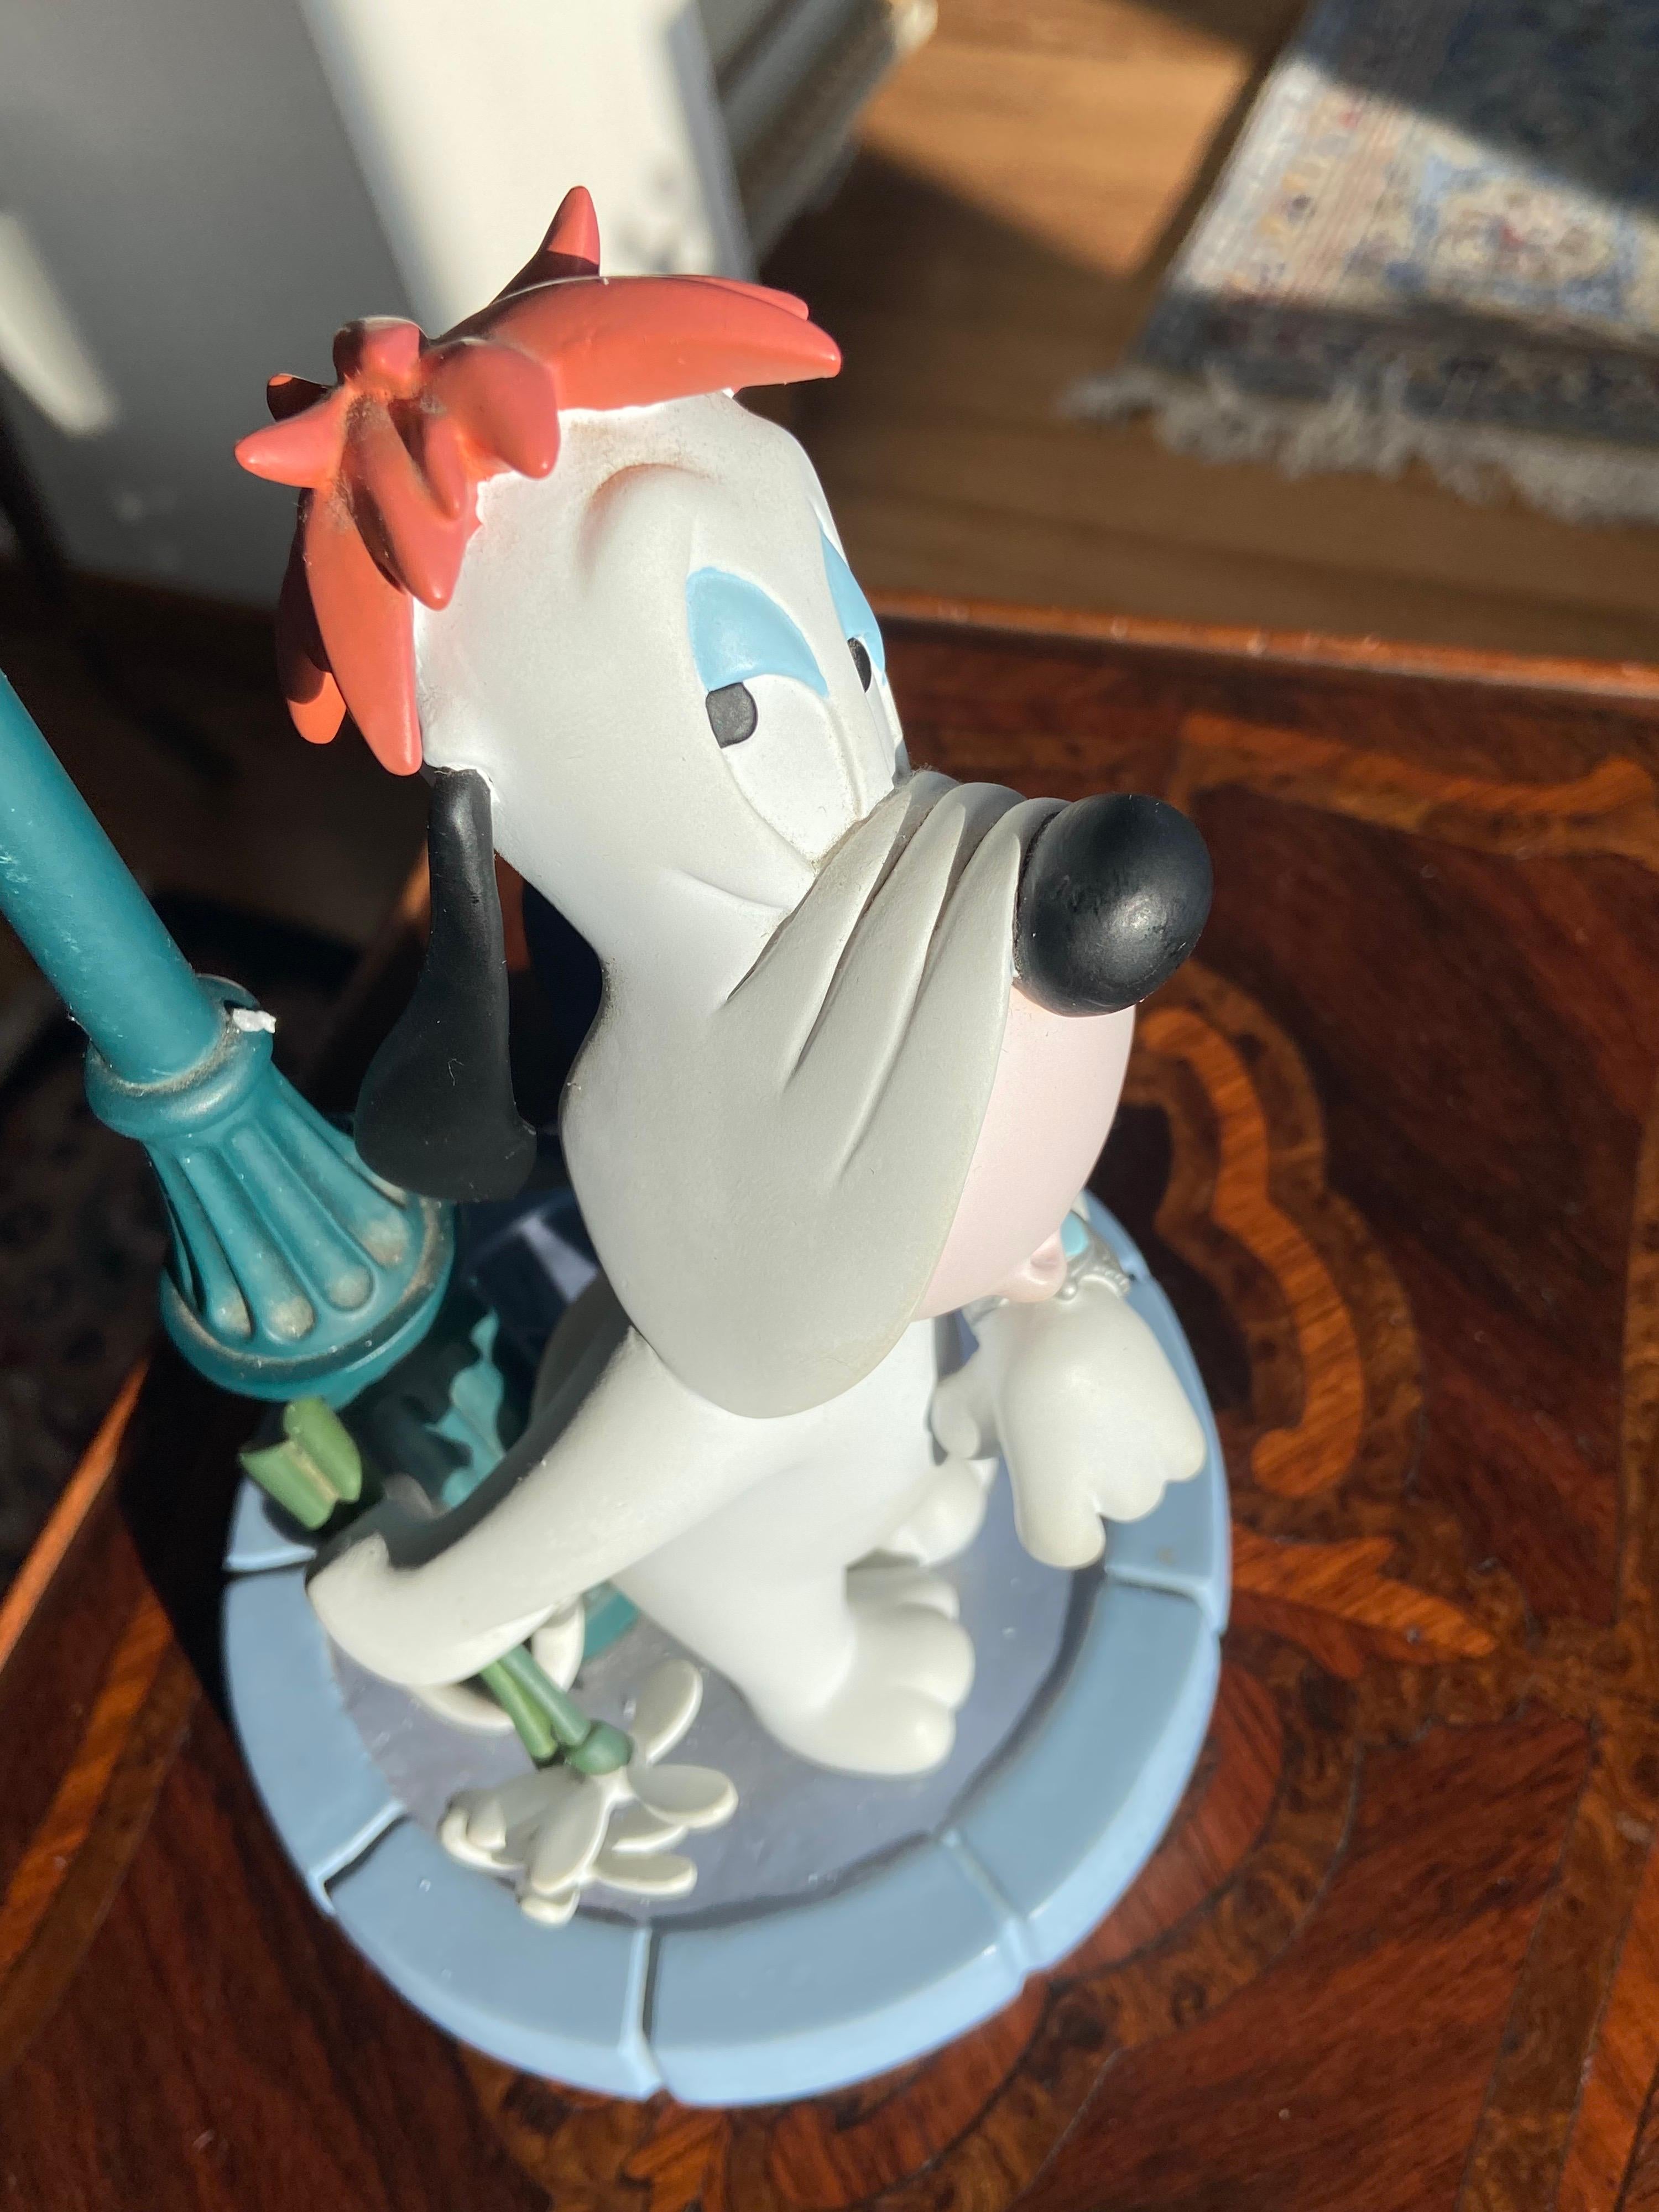 Contemporary Rare and Collectable Droopy by the Clock by Demons & Merveilles Figurine Statue For Sale